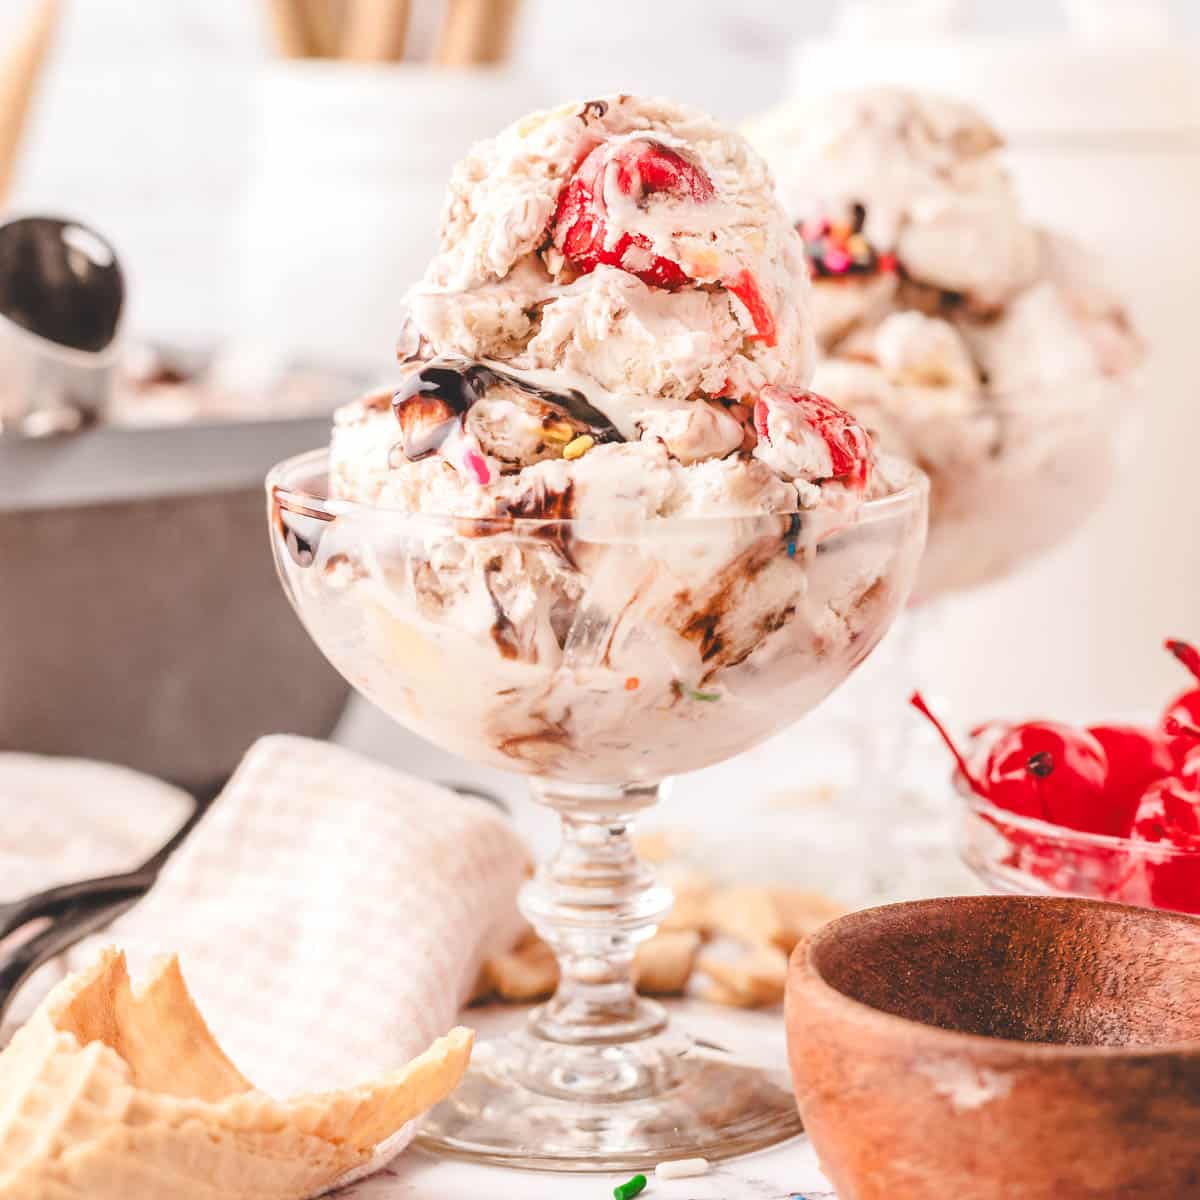 A glass dessert bowl with scoops of no-churn banana slip ice cream.